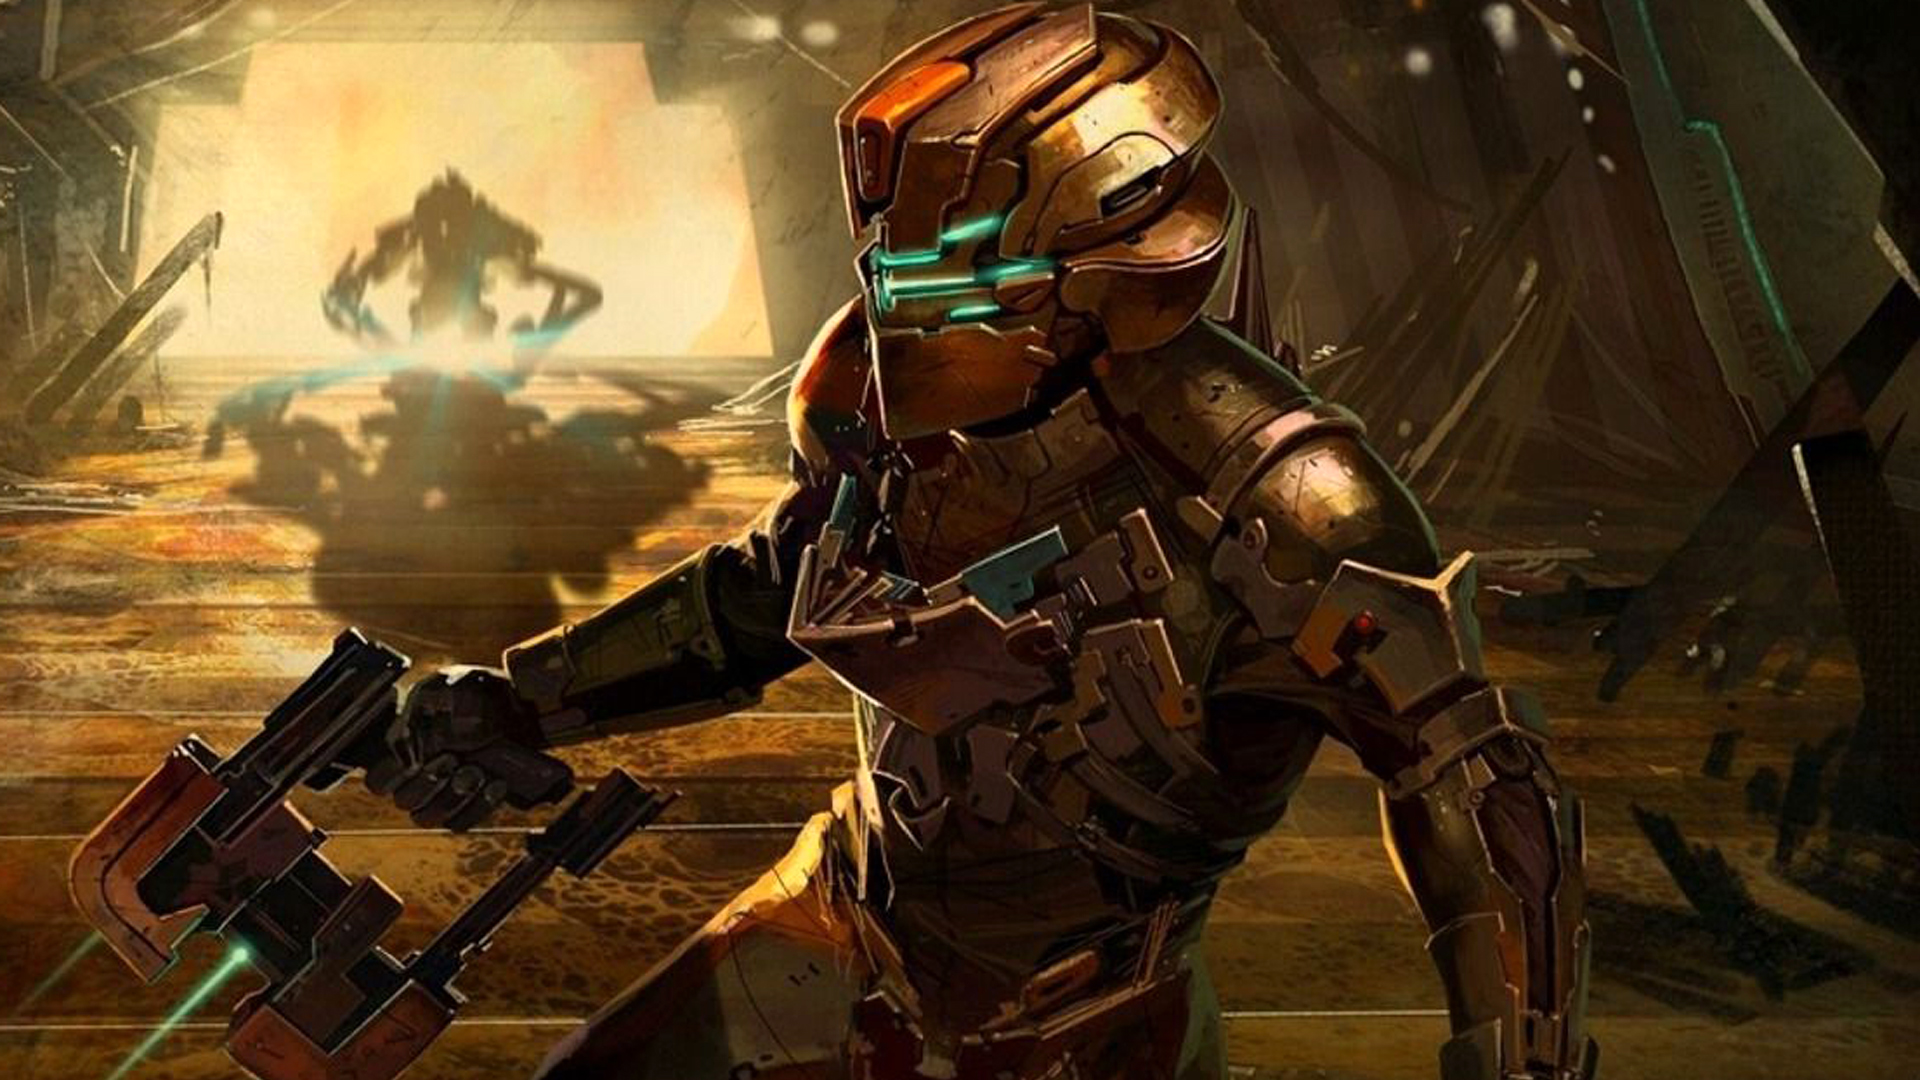 Dead Space is reportedly targeting a 2022 release date